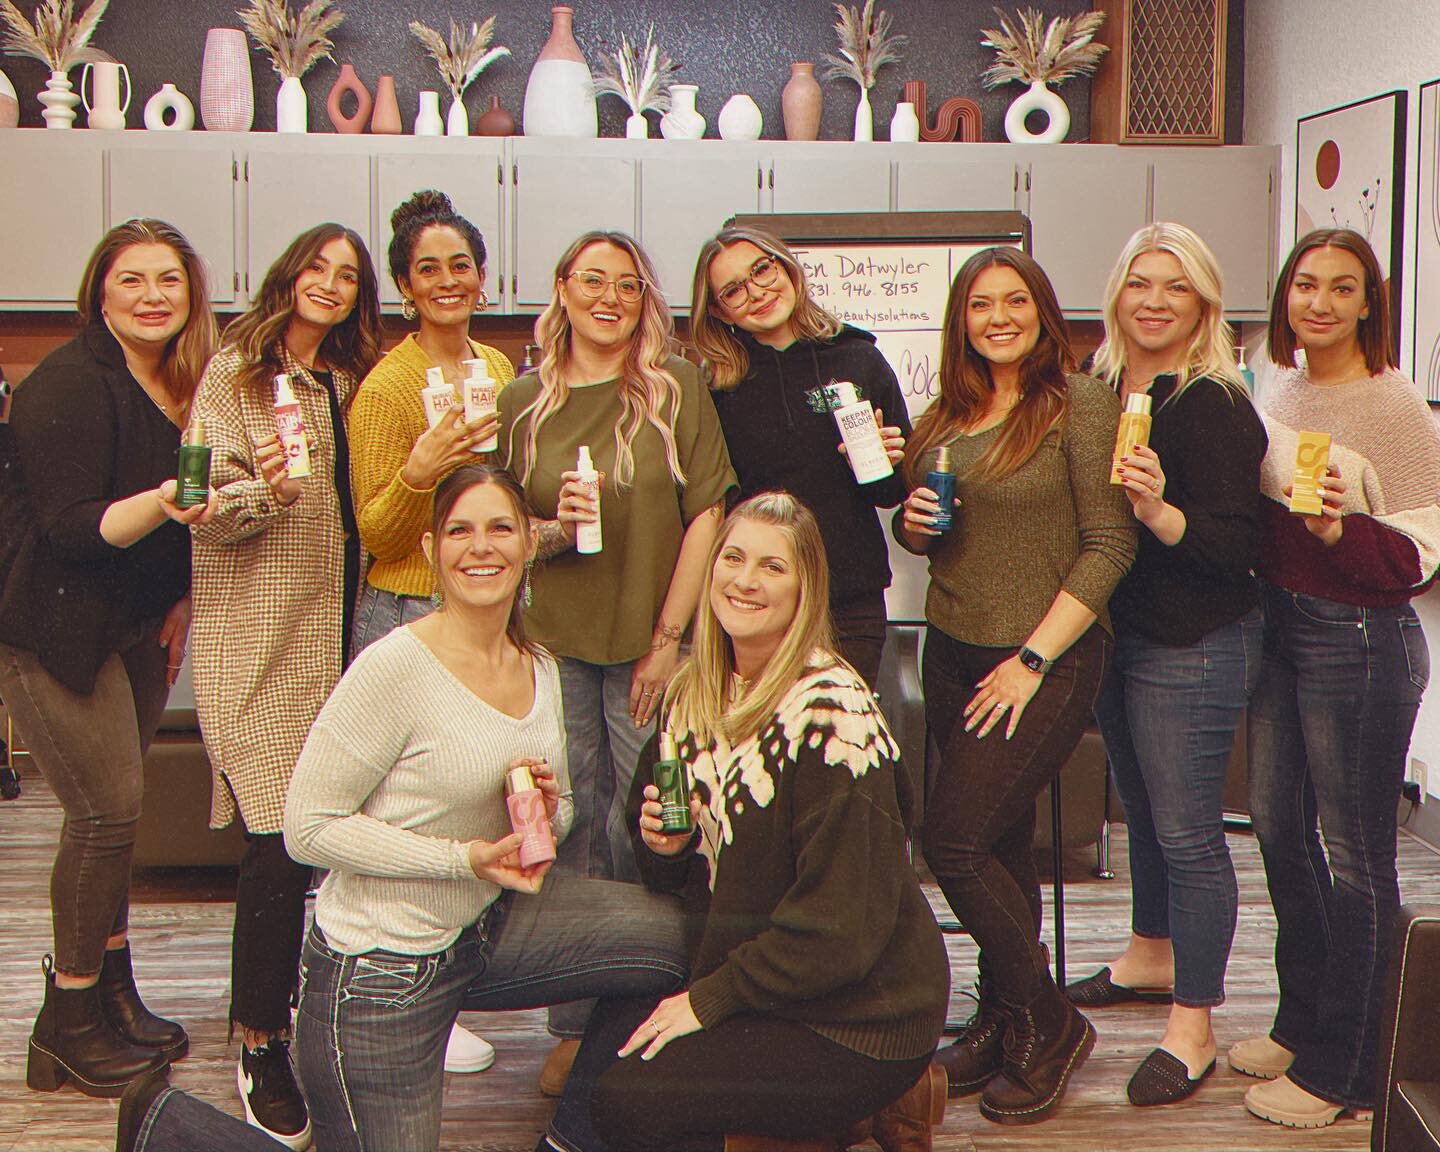 Ringing in the new year with some product eduction from our girl @jen_d.beautysolutions! Refreshed our understanding of @elevenaustralia and @colorproofhair while also learning about the new products they launched! Have your tried Eleven or Colorproo